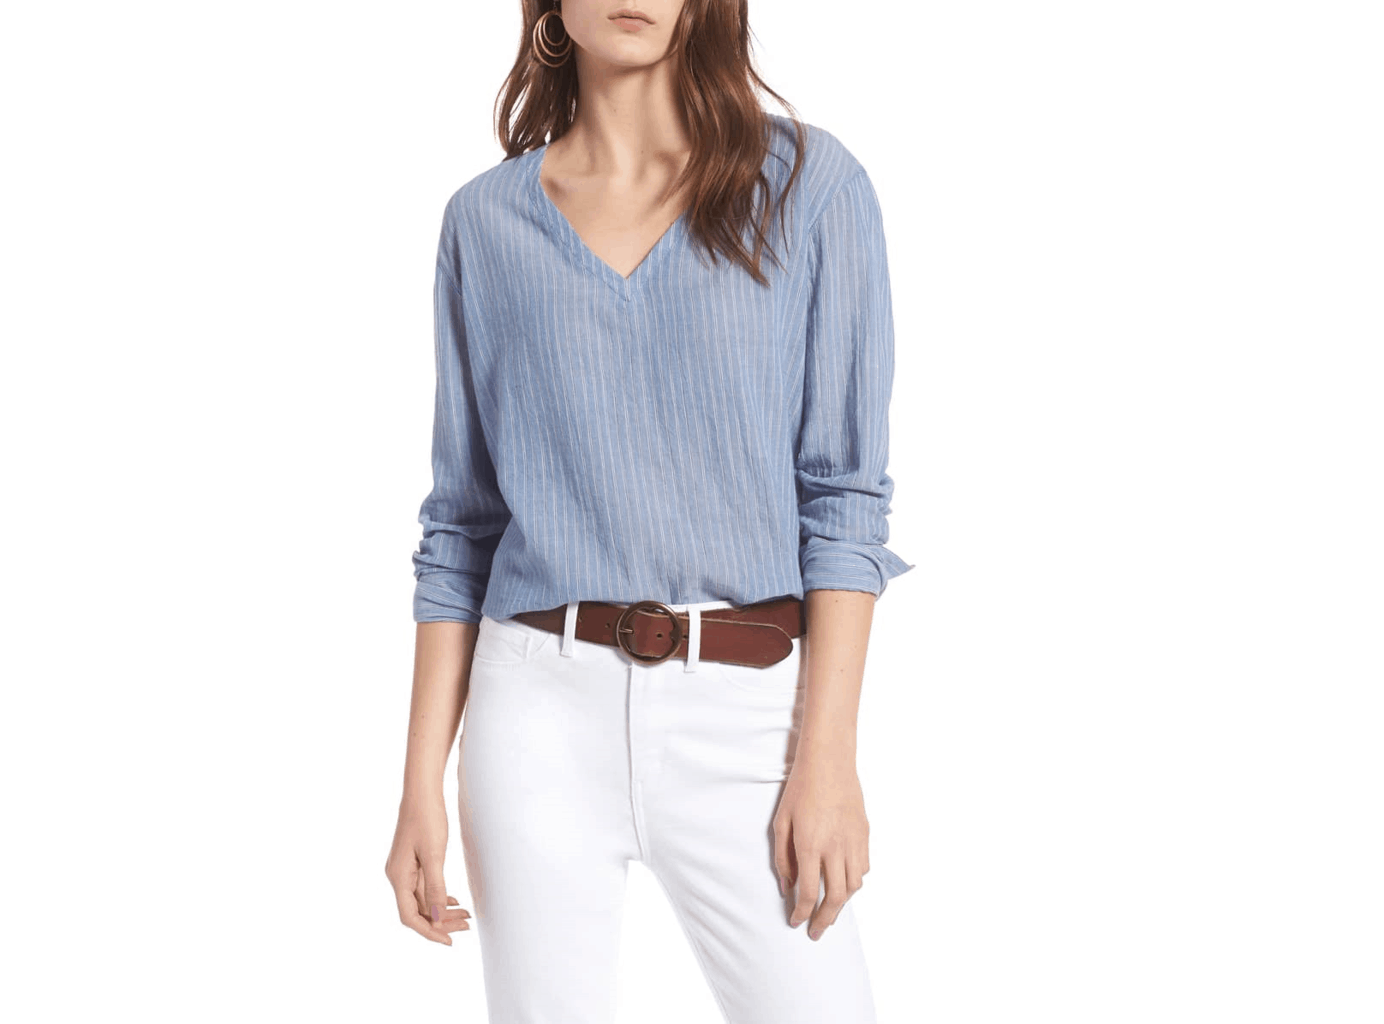 Why Preppy Tops Are A Must-Have